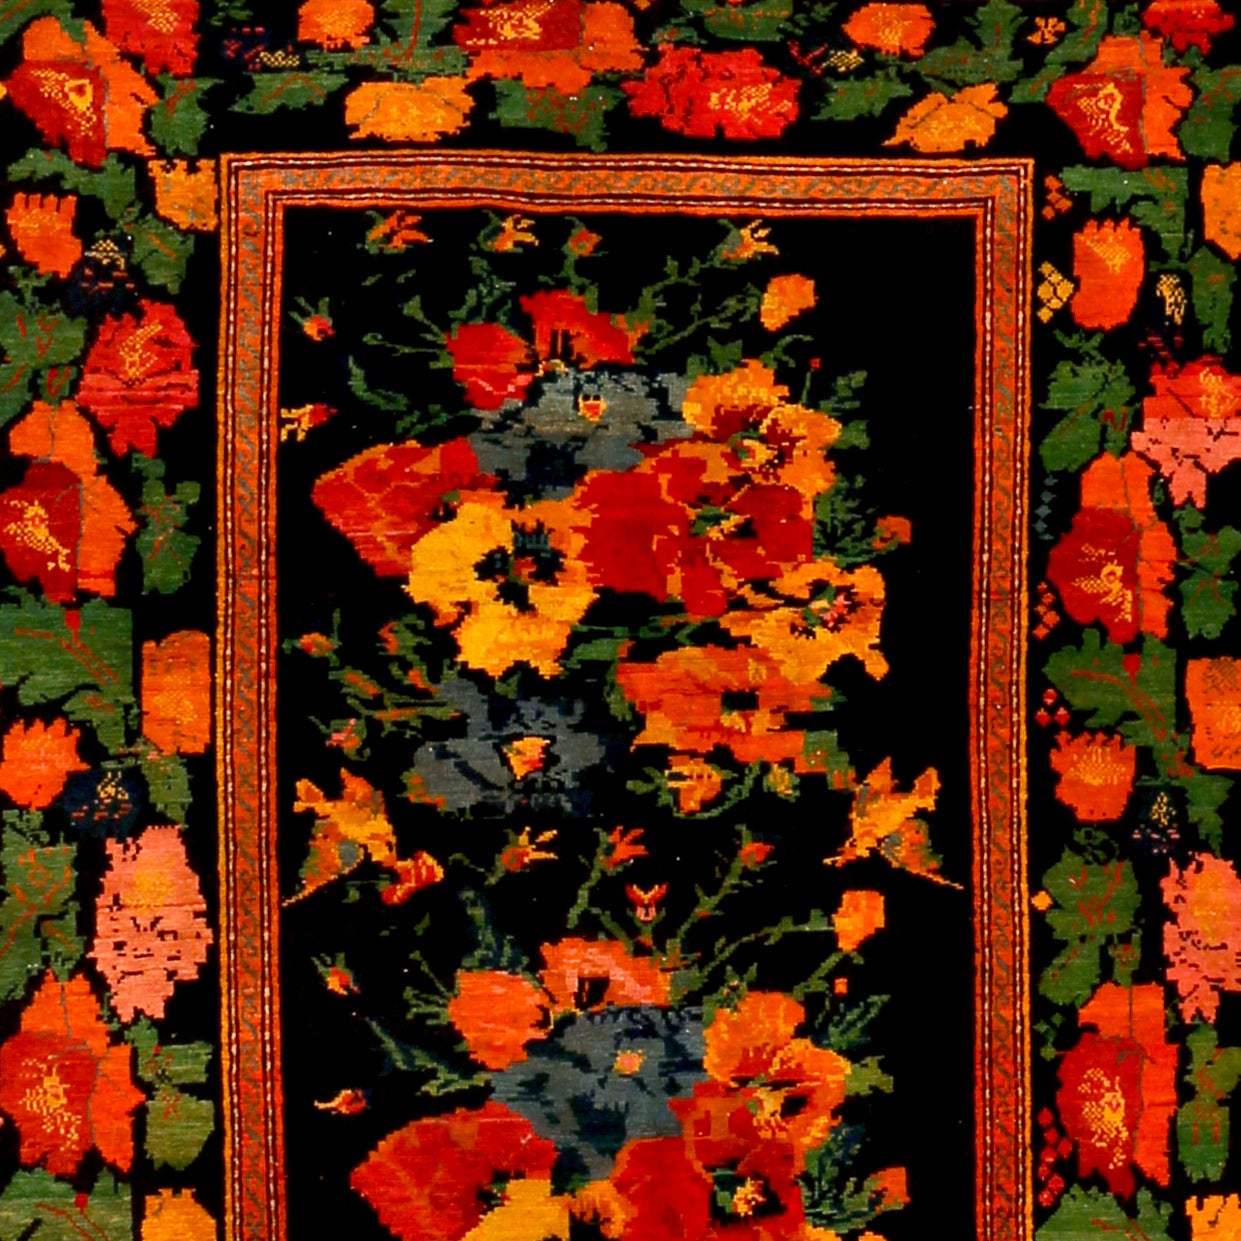 The floral ornamentation typical of French and English carpets of the 18th-19th century has influenced specific oriental carpet families. In the Caucasus this style became extremely fashionable among the Russian aristocracy of the 19th century,